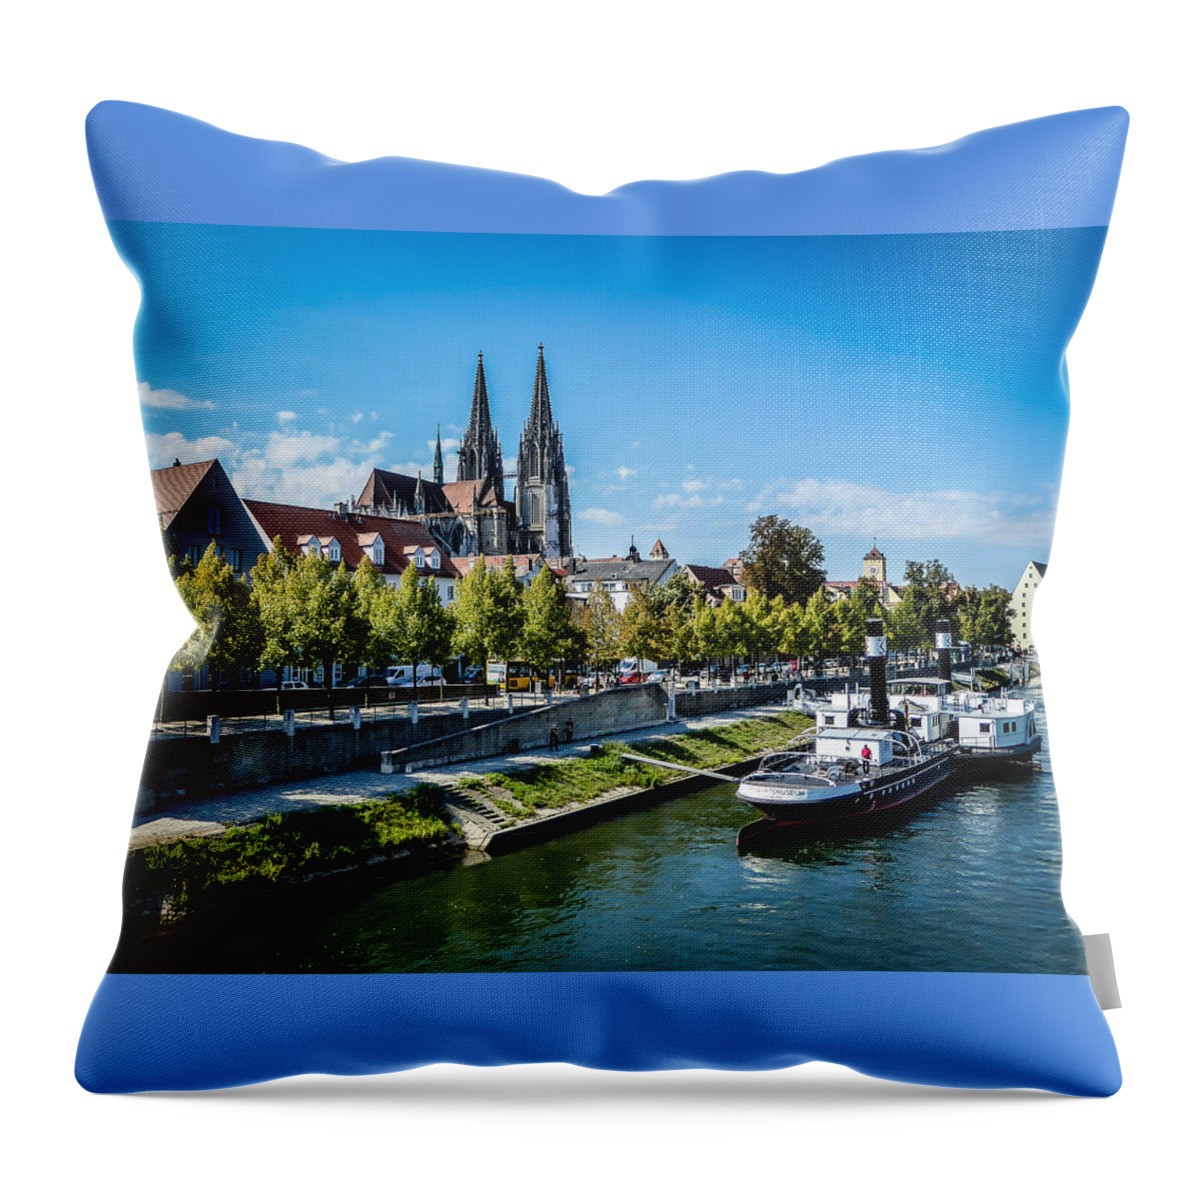 Regensgurg Throw Pillow featuring the photograph Old Regensburg Cityscape by Pamela Newcomb